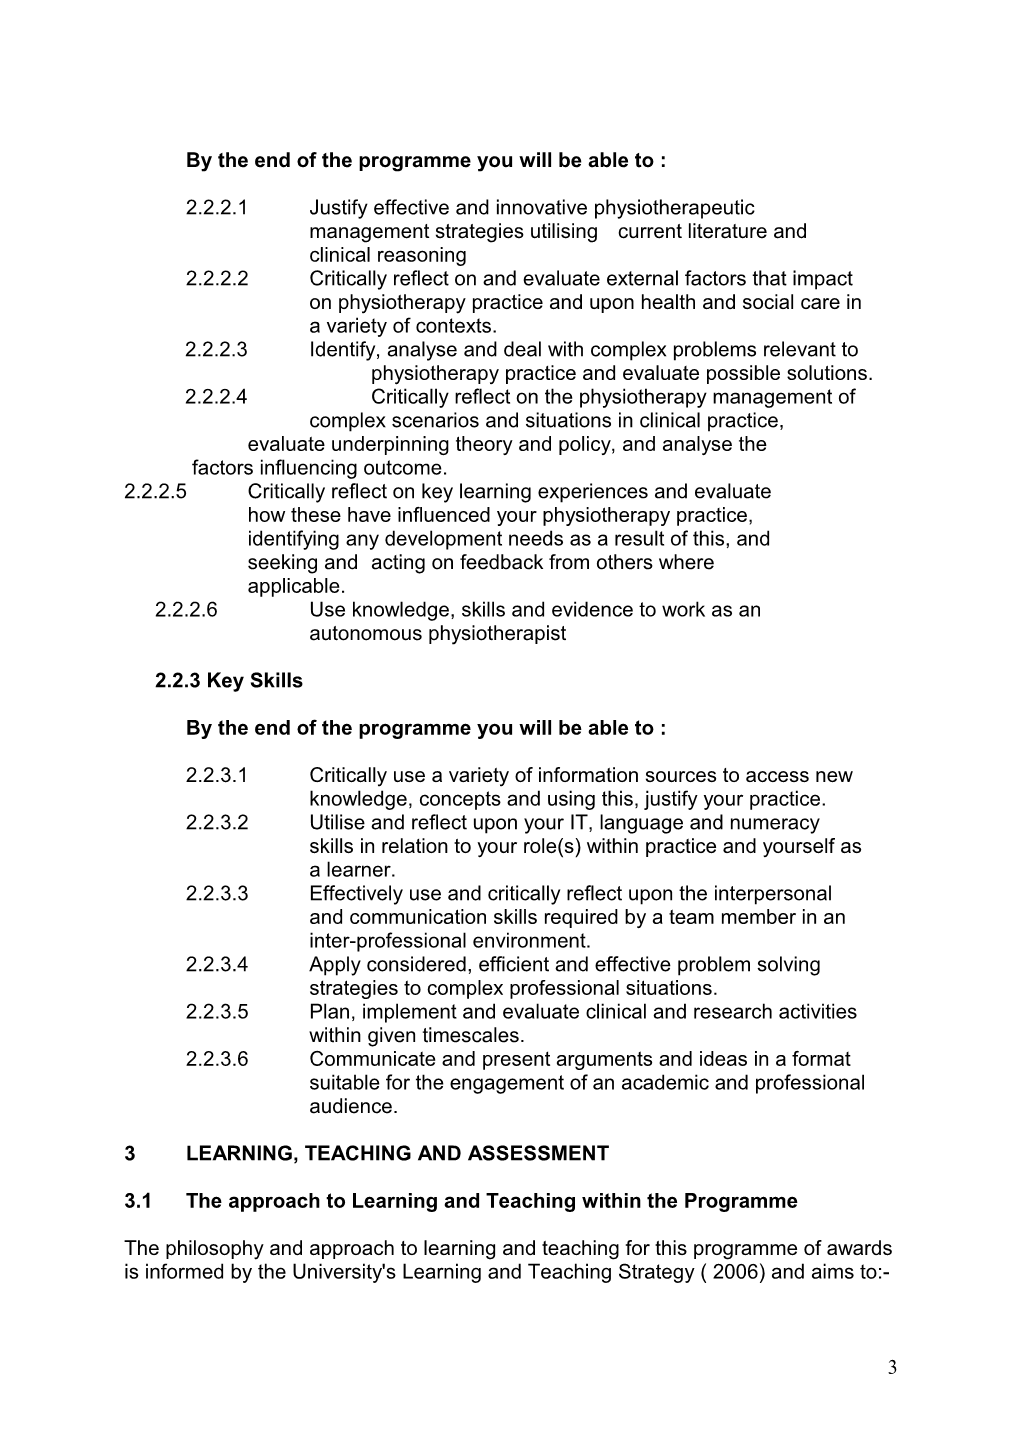 1.2To Enhance Proficiency and Effectiveness As a Learner and As a Practitioner Within An